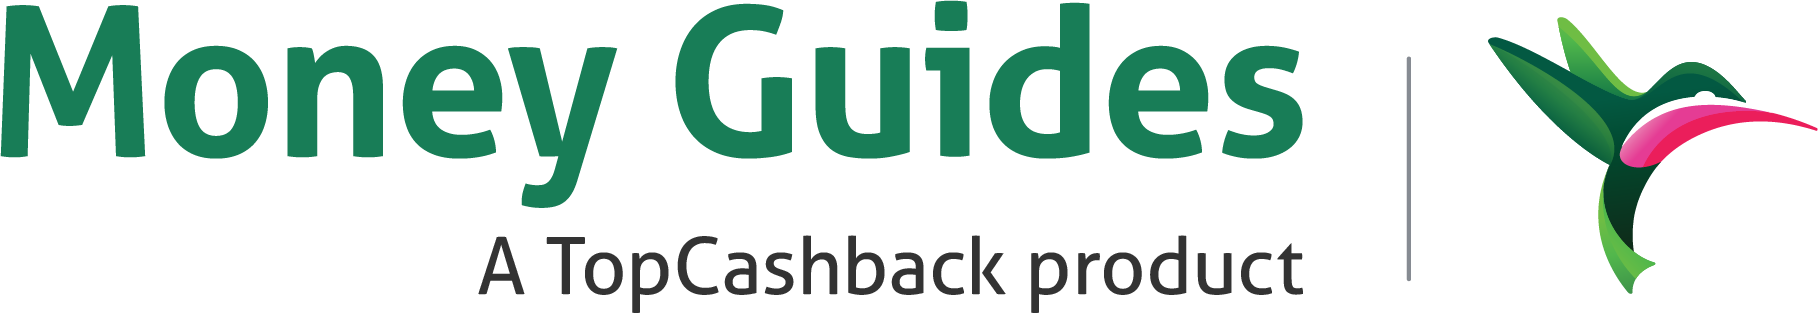 Logo for Money Guides by TopCashback